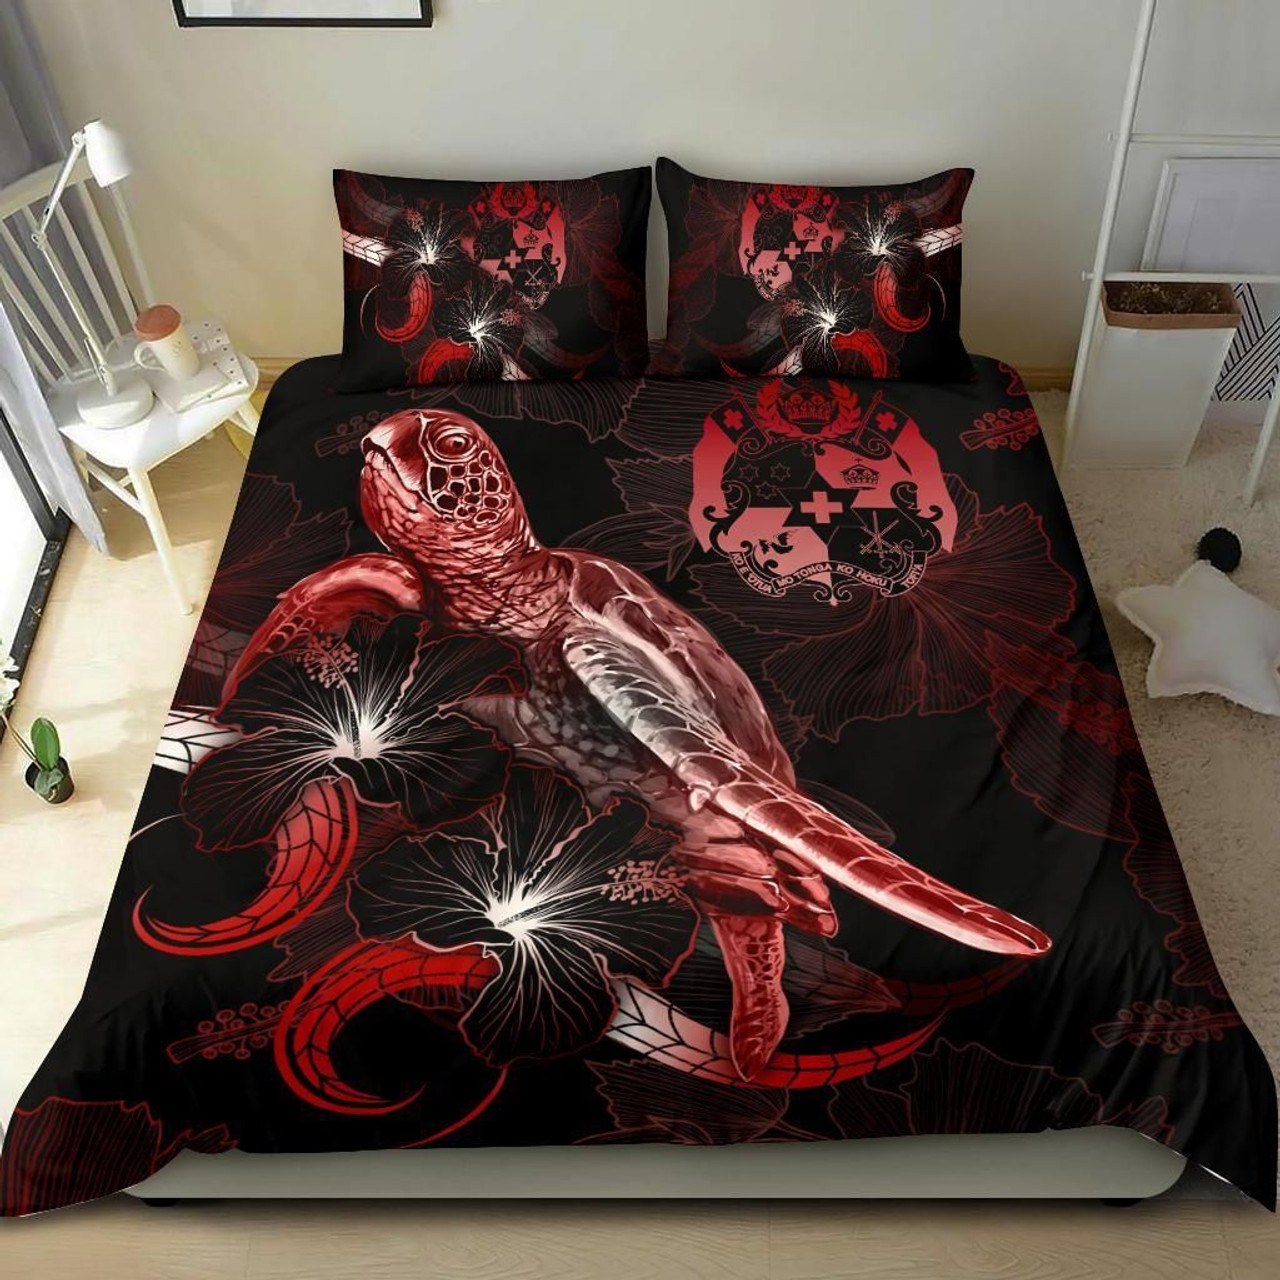 Tonga Polynesian Bedding Set - Turtle With Blooming Hibiscus Red 2